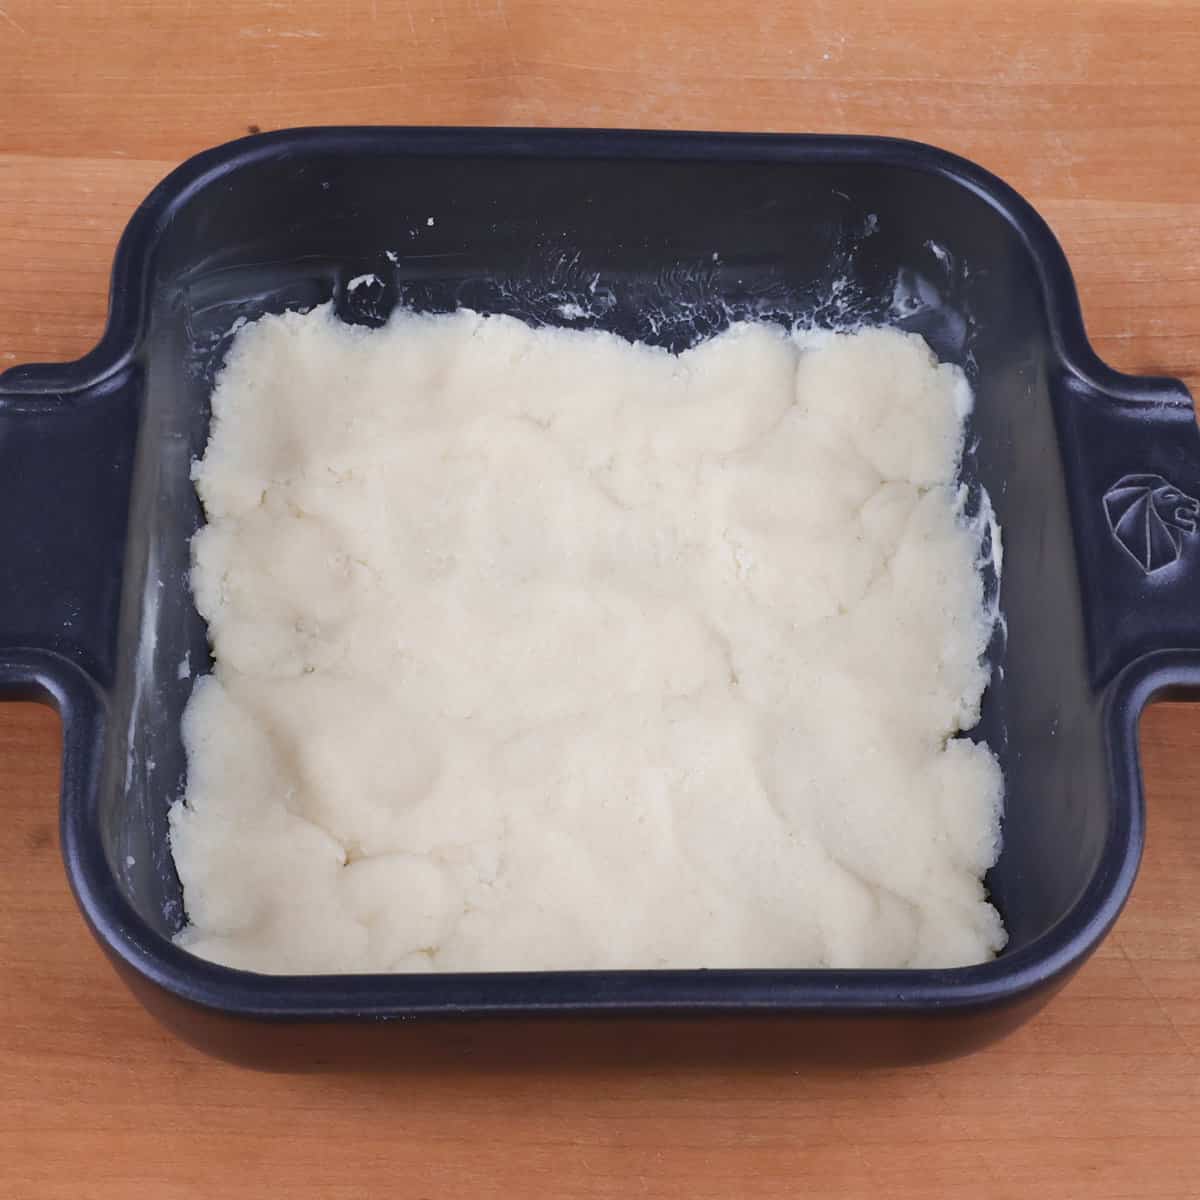 an unbaked shortbread pie crust in a small baking dish.